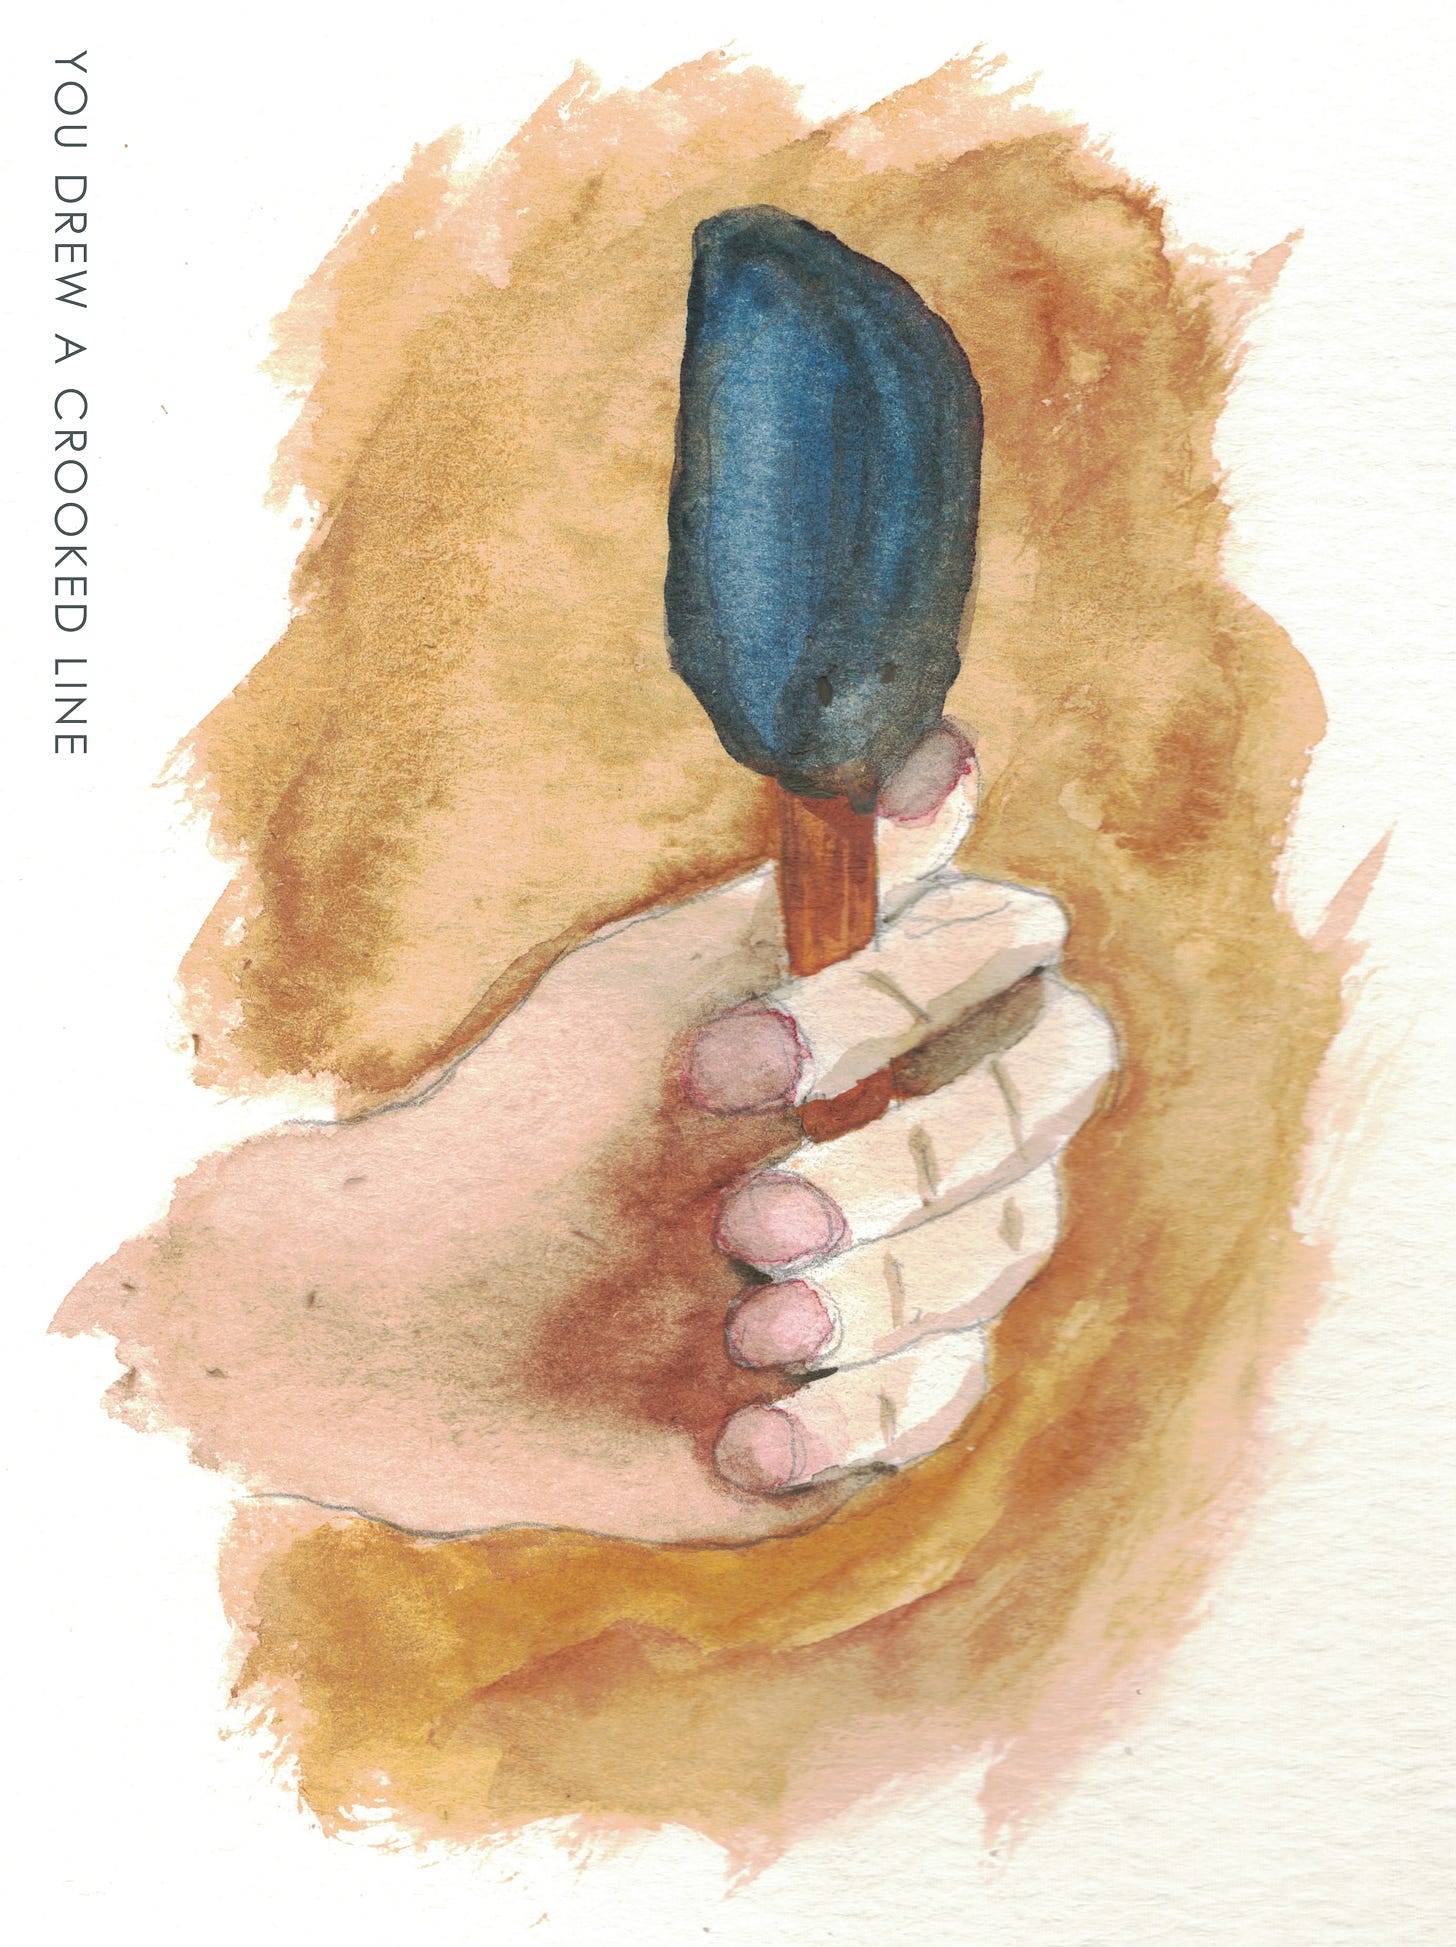 Watercolor illustration of a hand holding a popsicle